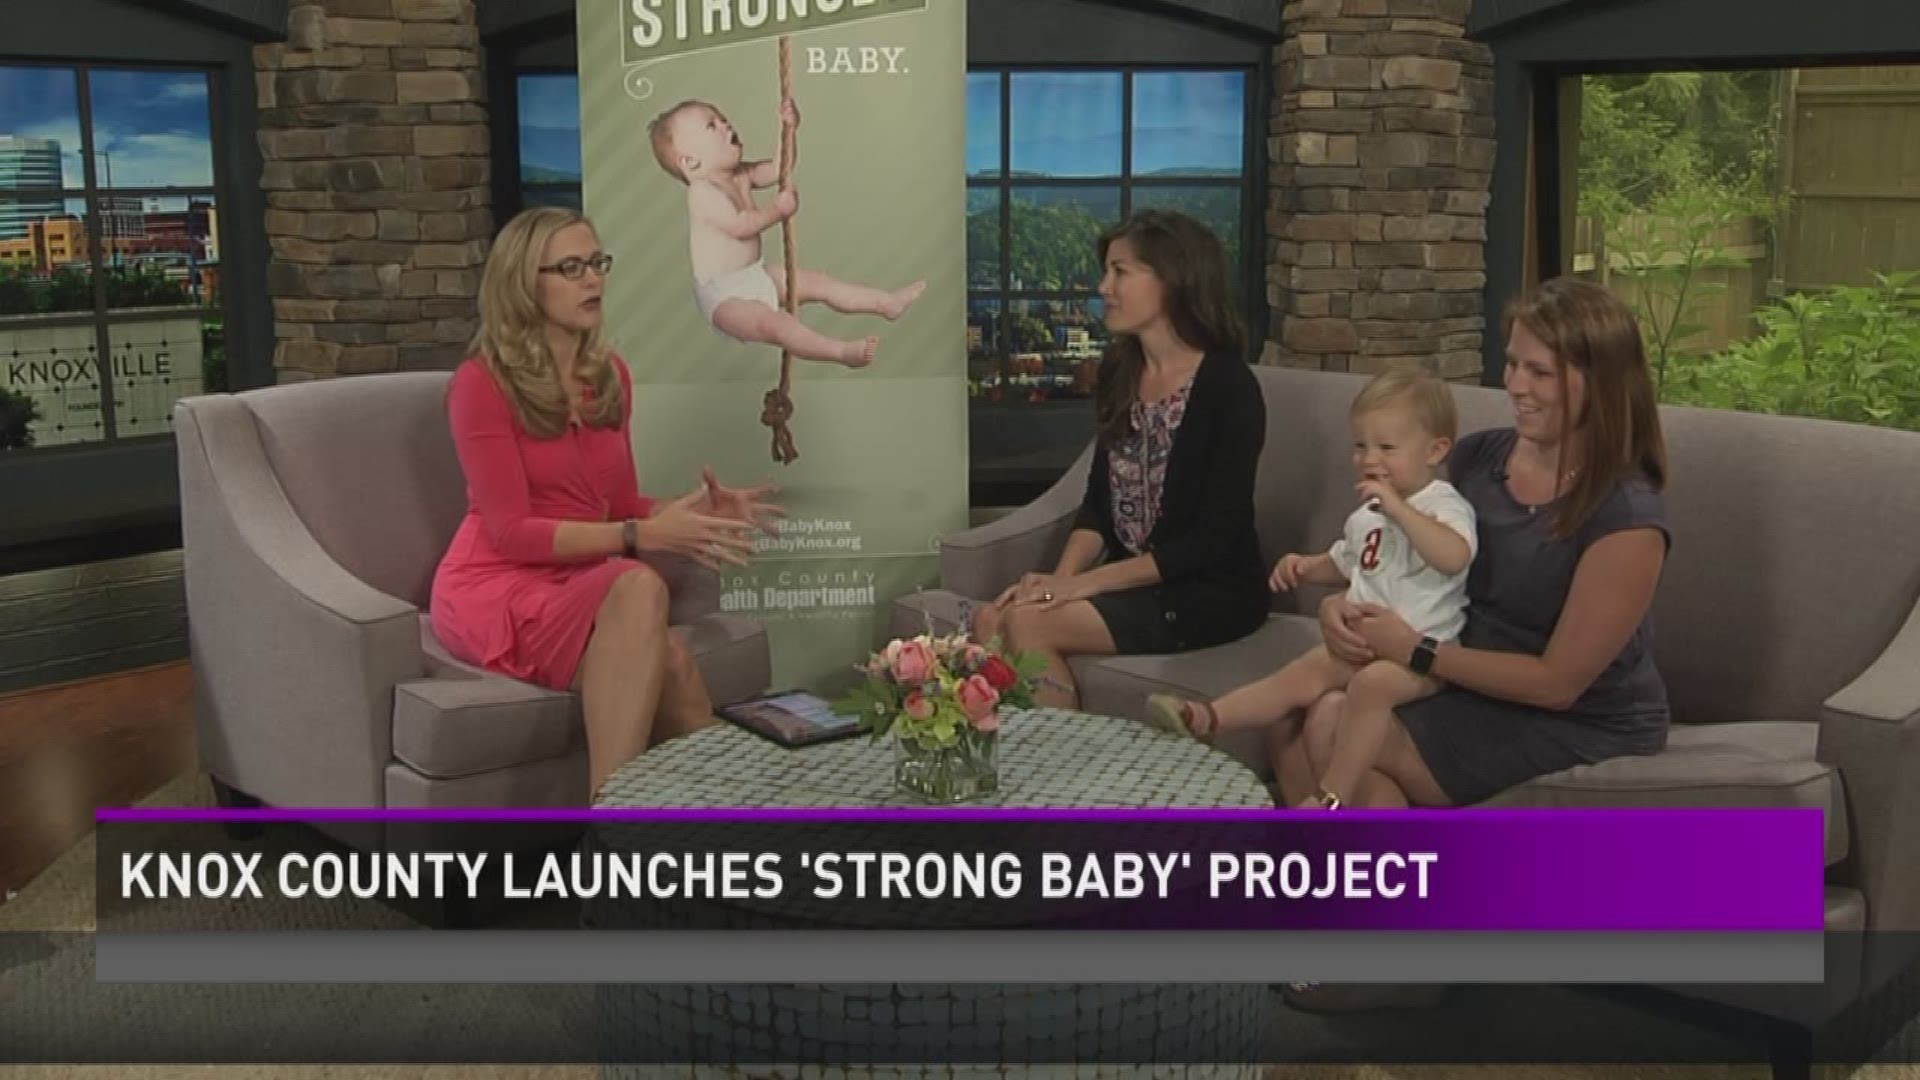 June 6, 2017: The Knox County Health Department is launching the Strong Baby Project, an initiative to improve the health of babies in East Tennessee and provide resources to new moms.